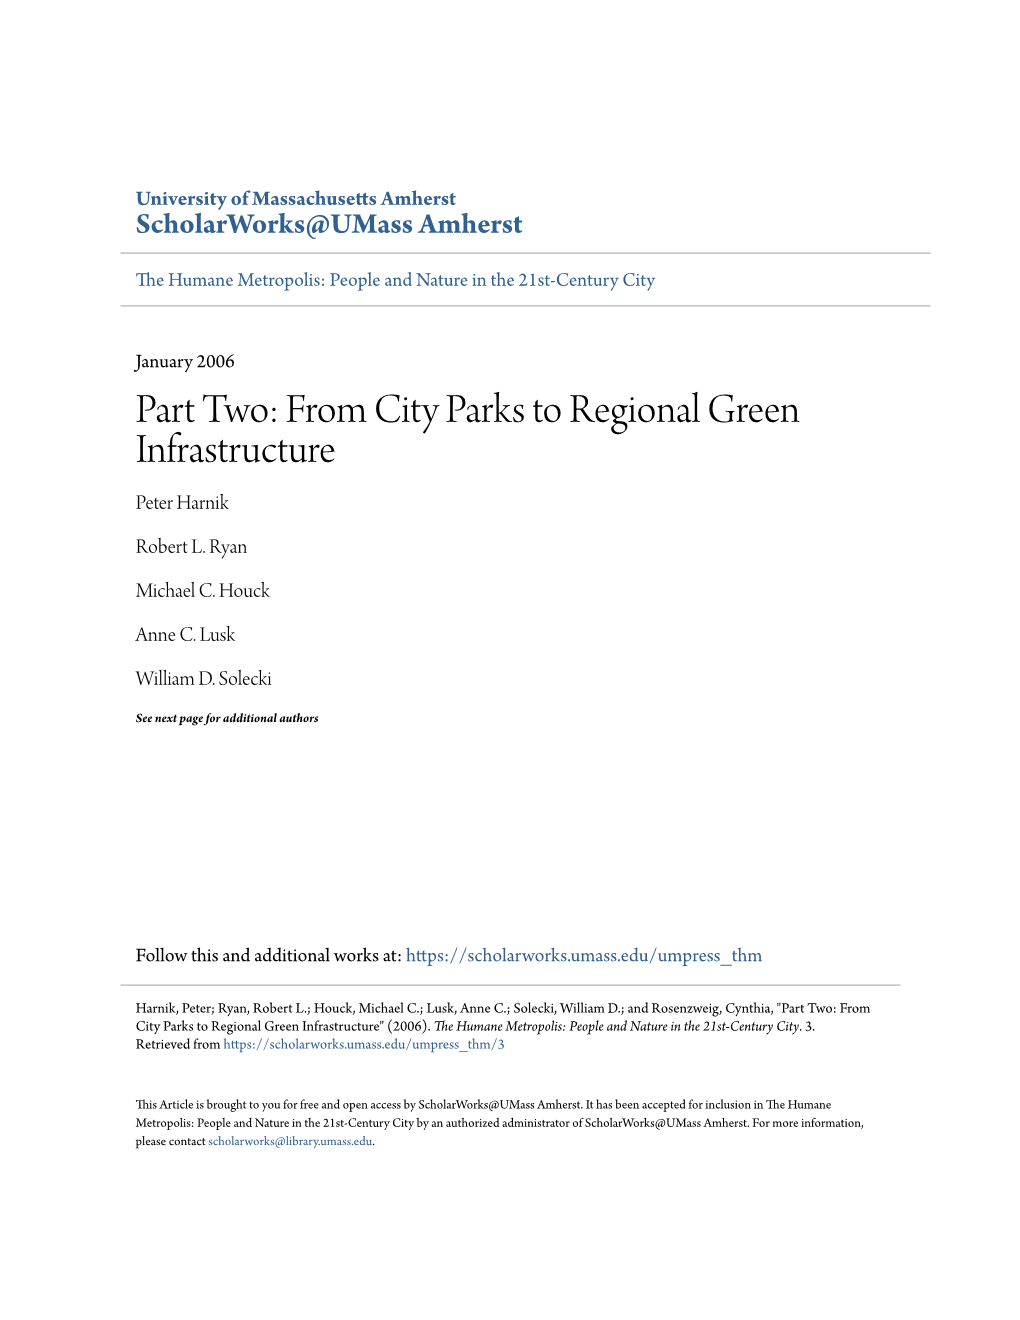 From City Parks to Regional Green Infrastructure Peter Harnik